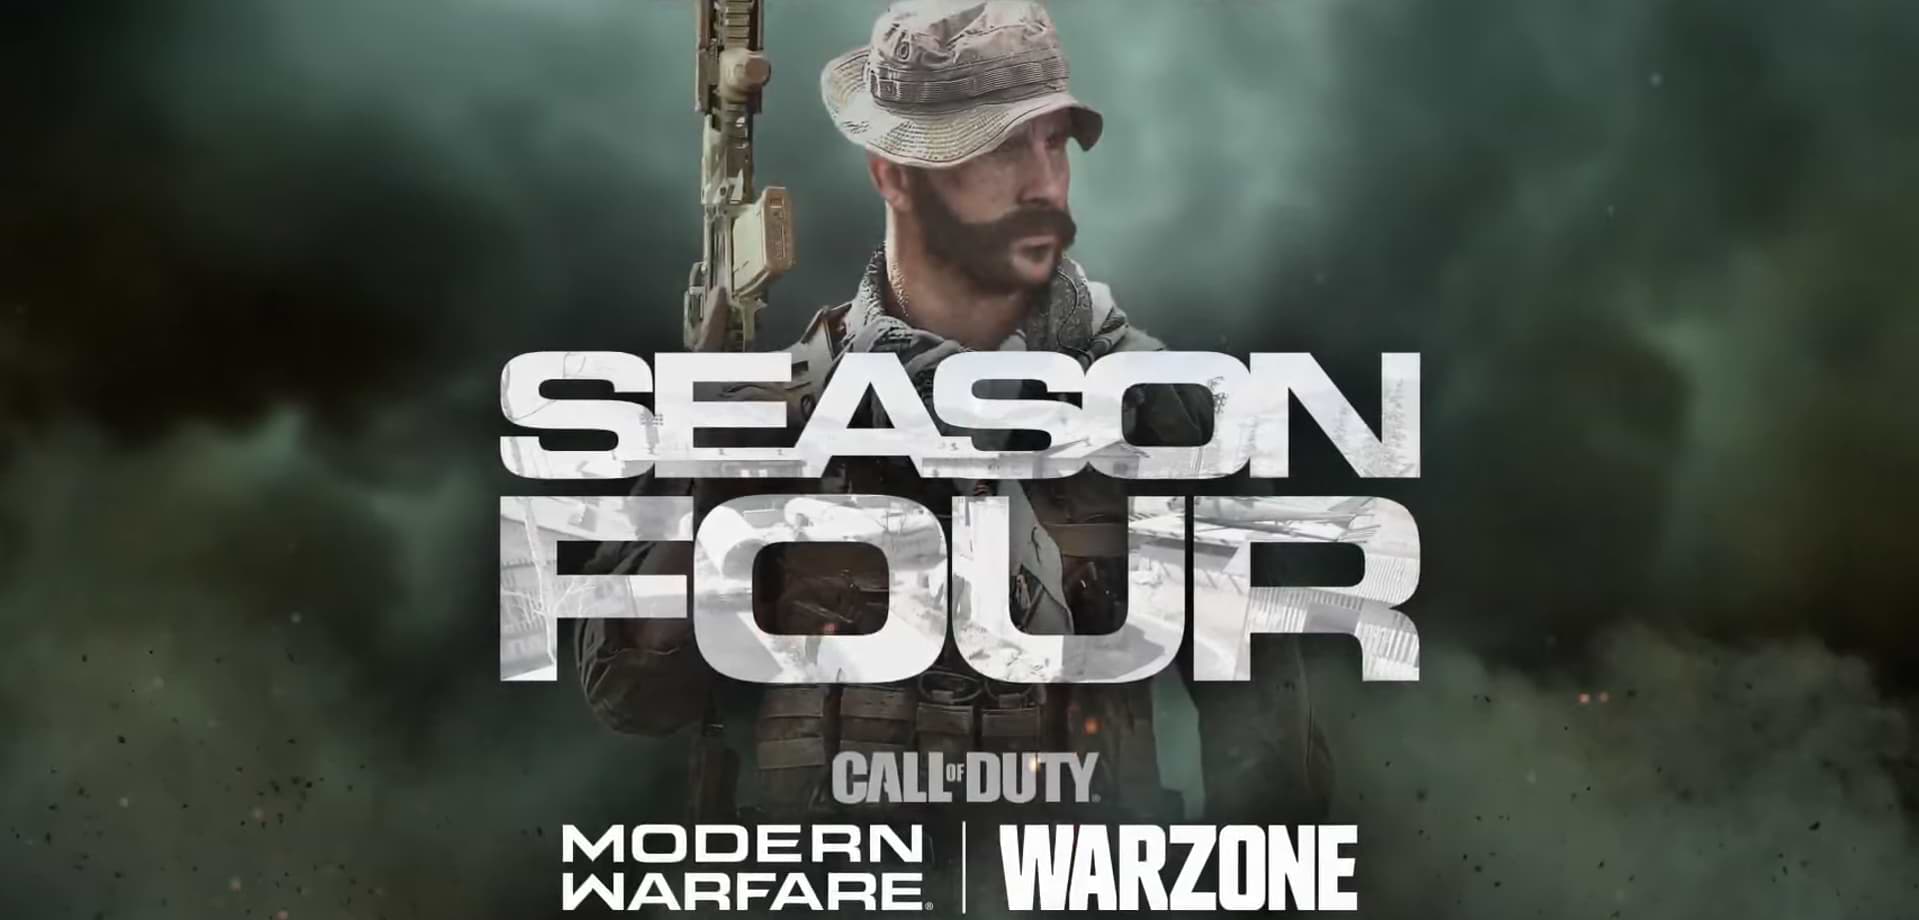 Season 4 Of Call Of Duty Modern Warfare And Warzone Has A Date Again And Will Arrive Today